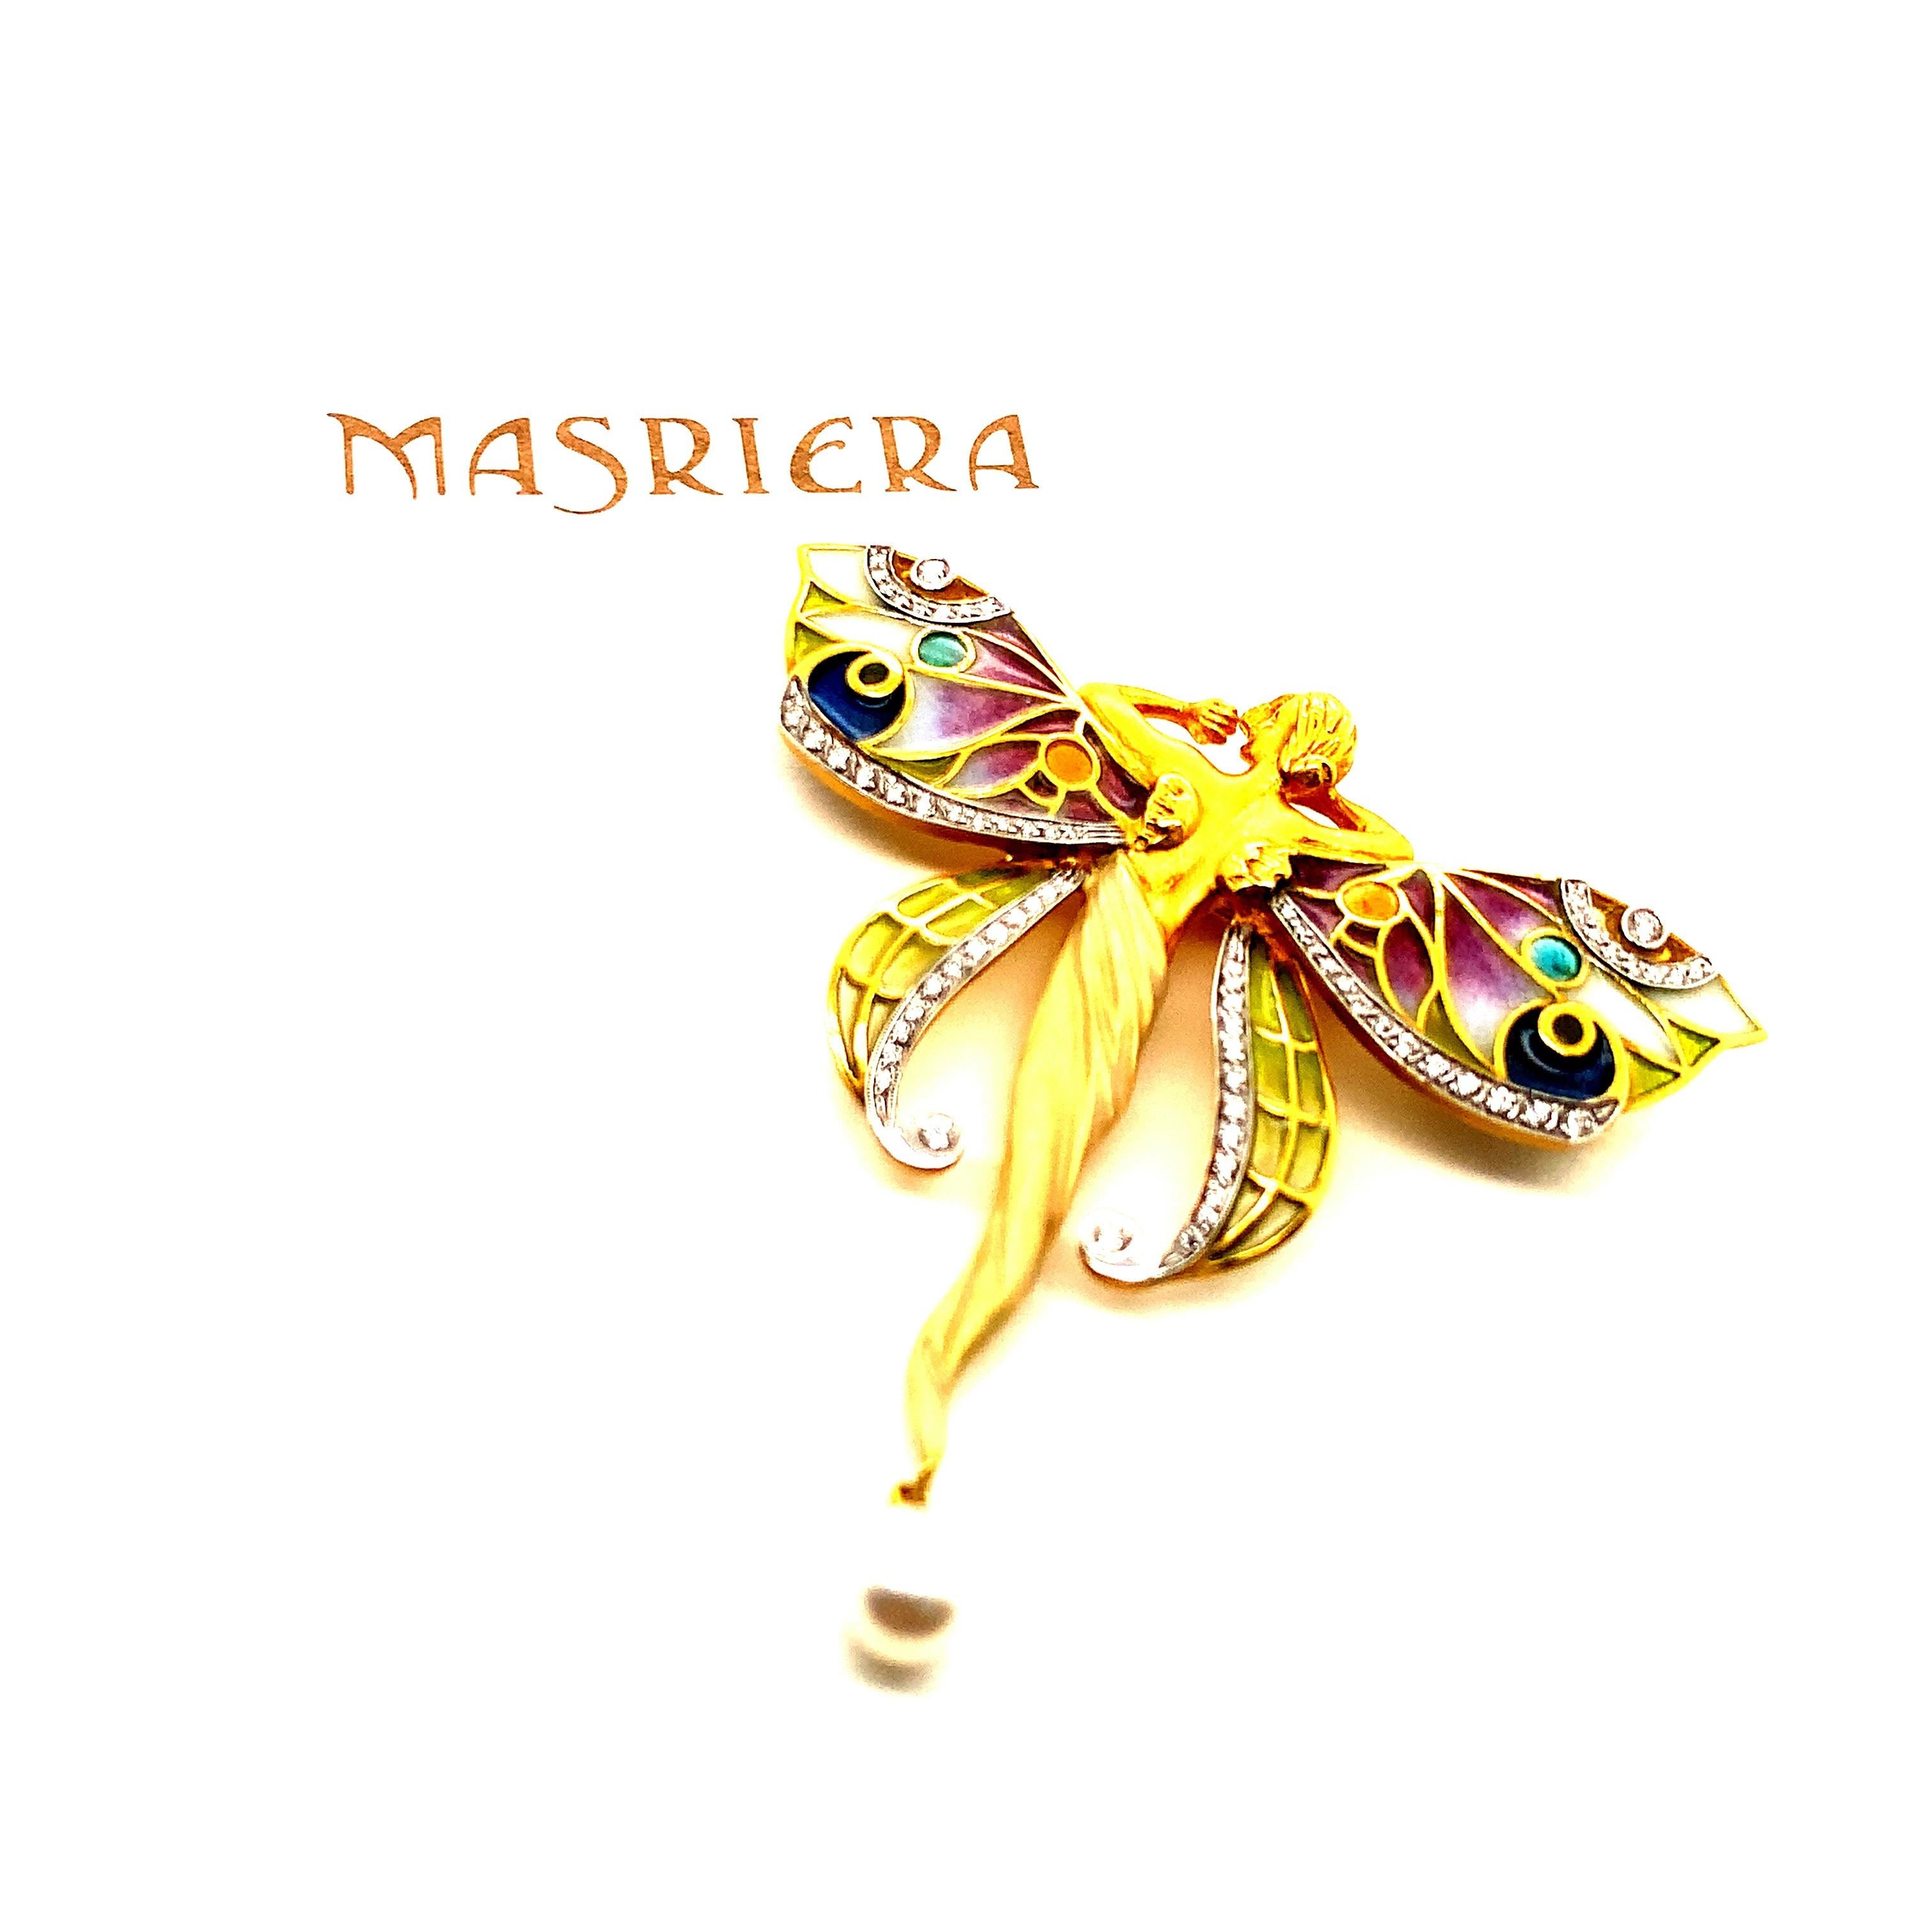 Masriera Purple Whisper Butterfly Brooch In Excellent Condition For Sale In New York, NY